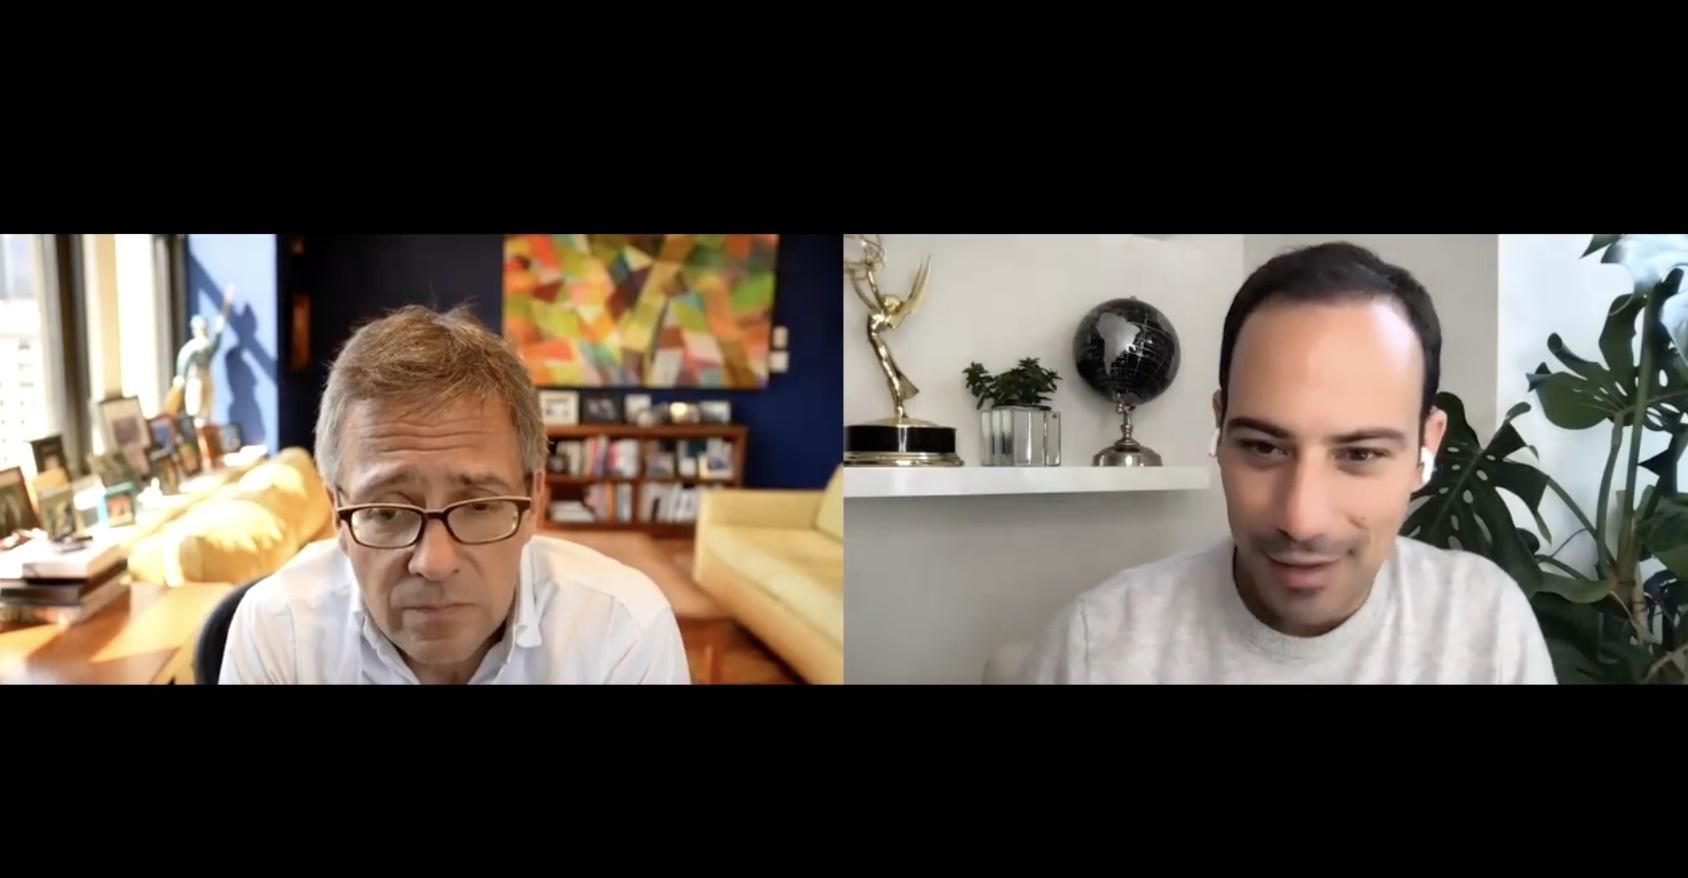 Ian Bremmer and Mosheh Oinounou on Putin’s mistakes, what Trump got right, and more